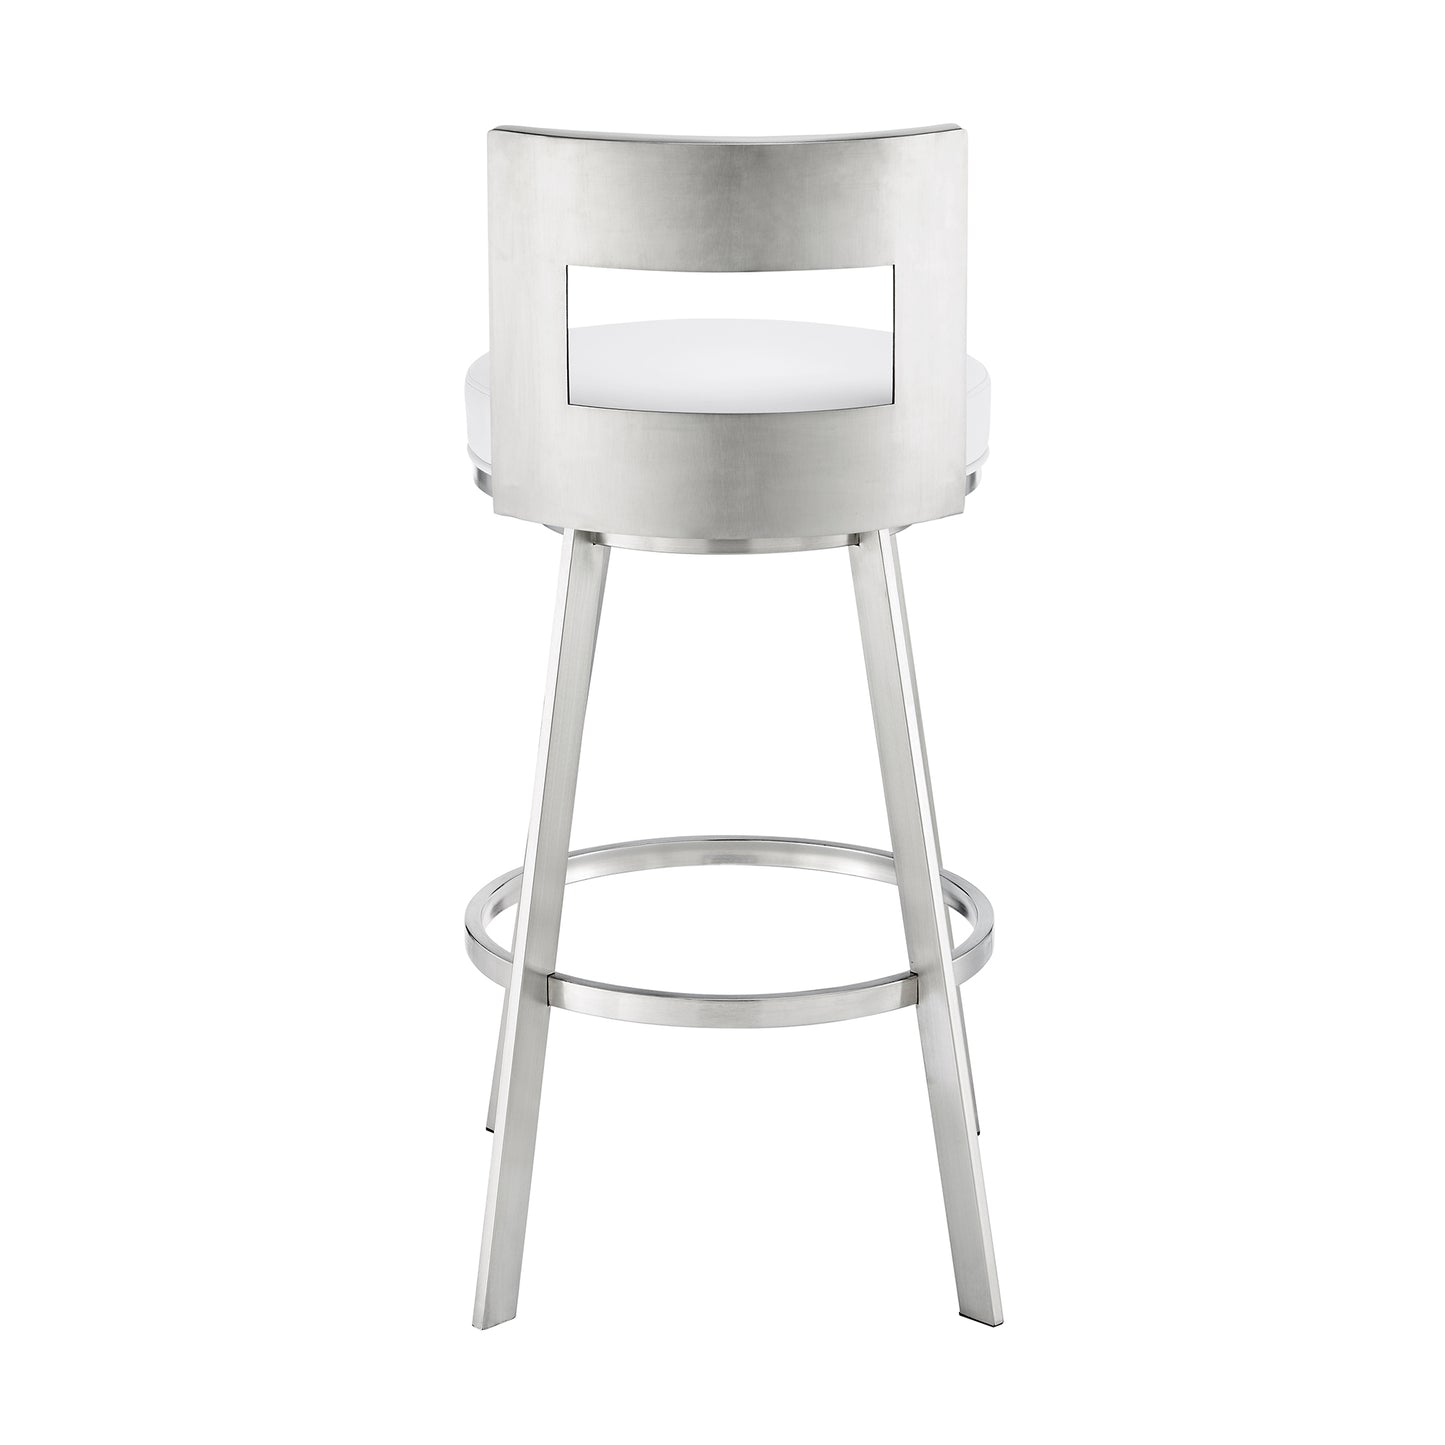 Flynn 30" Swivel Bar Stool in Brushed Stainless Steel with White Faux Leather